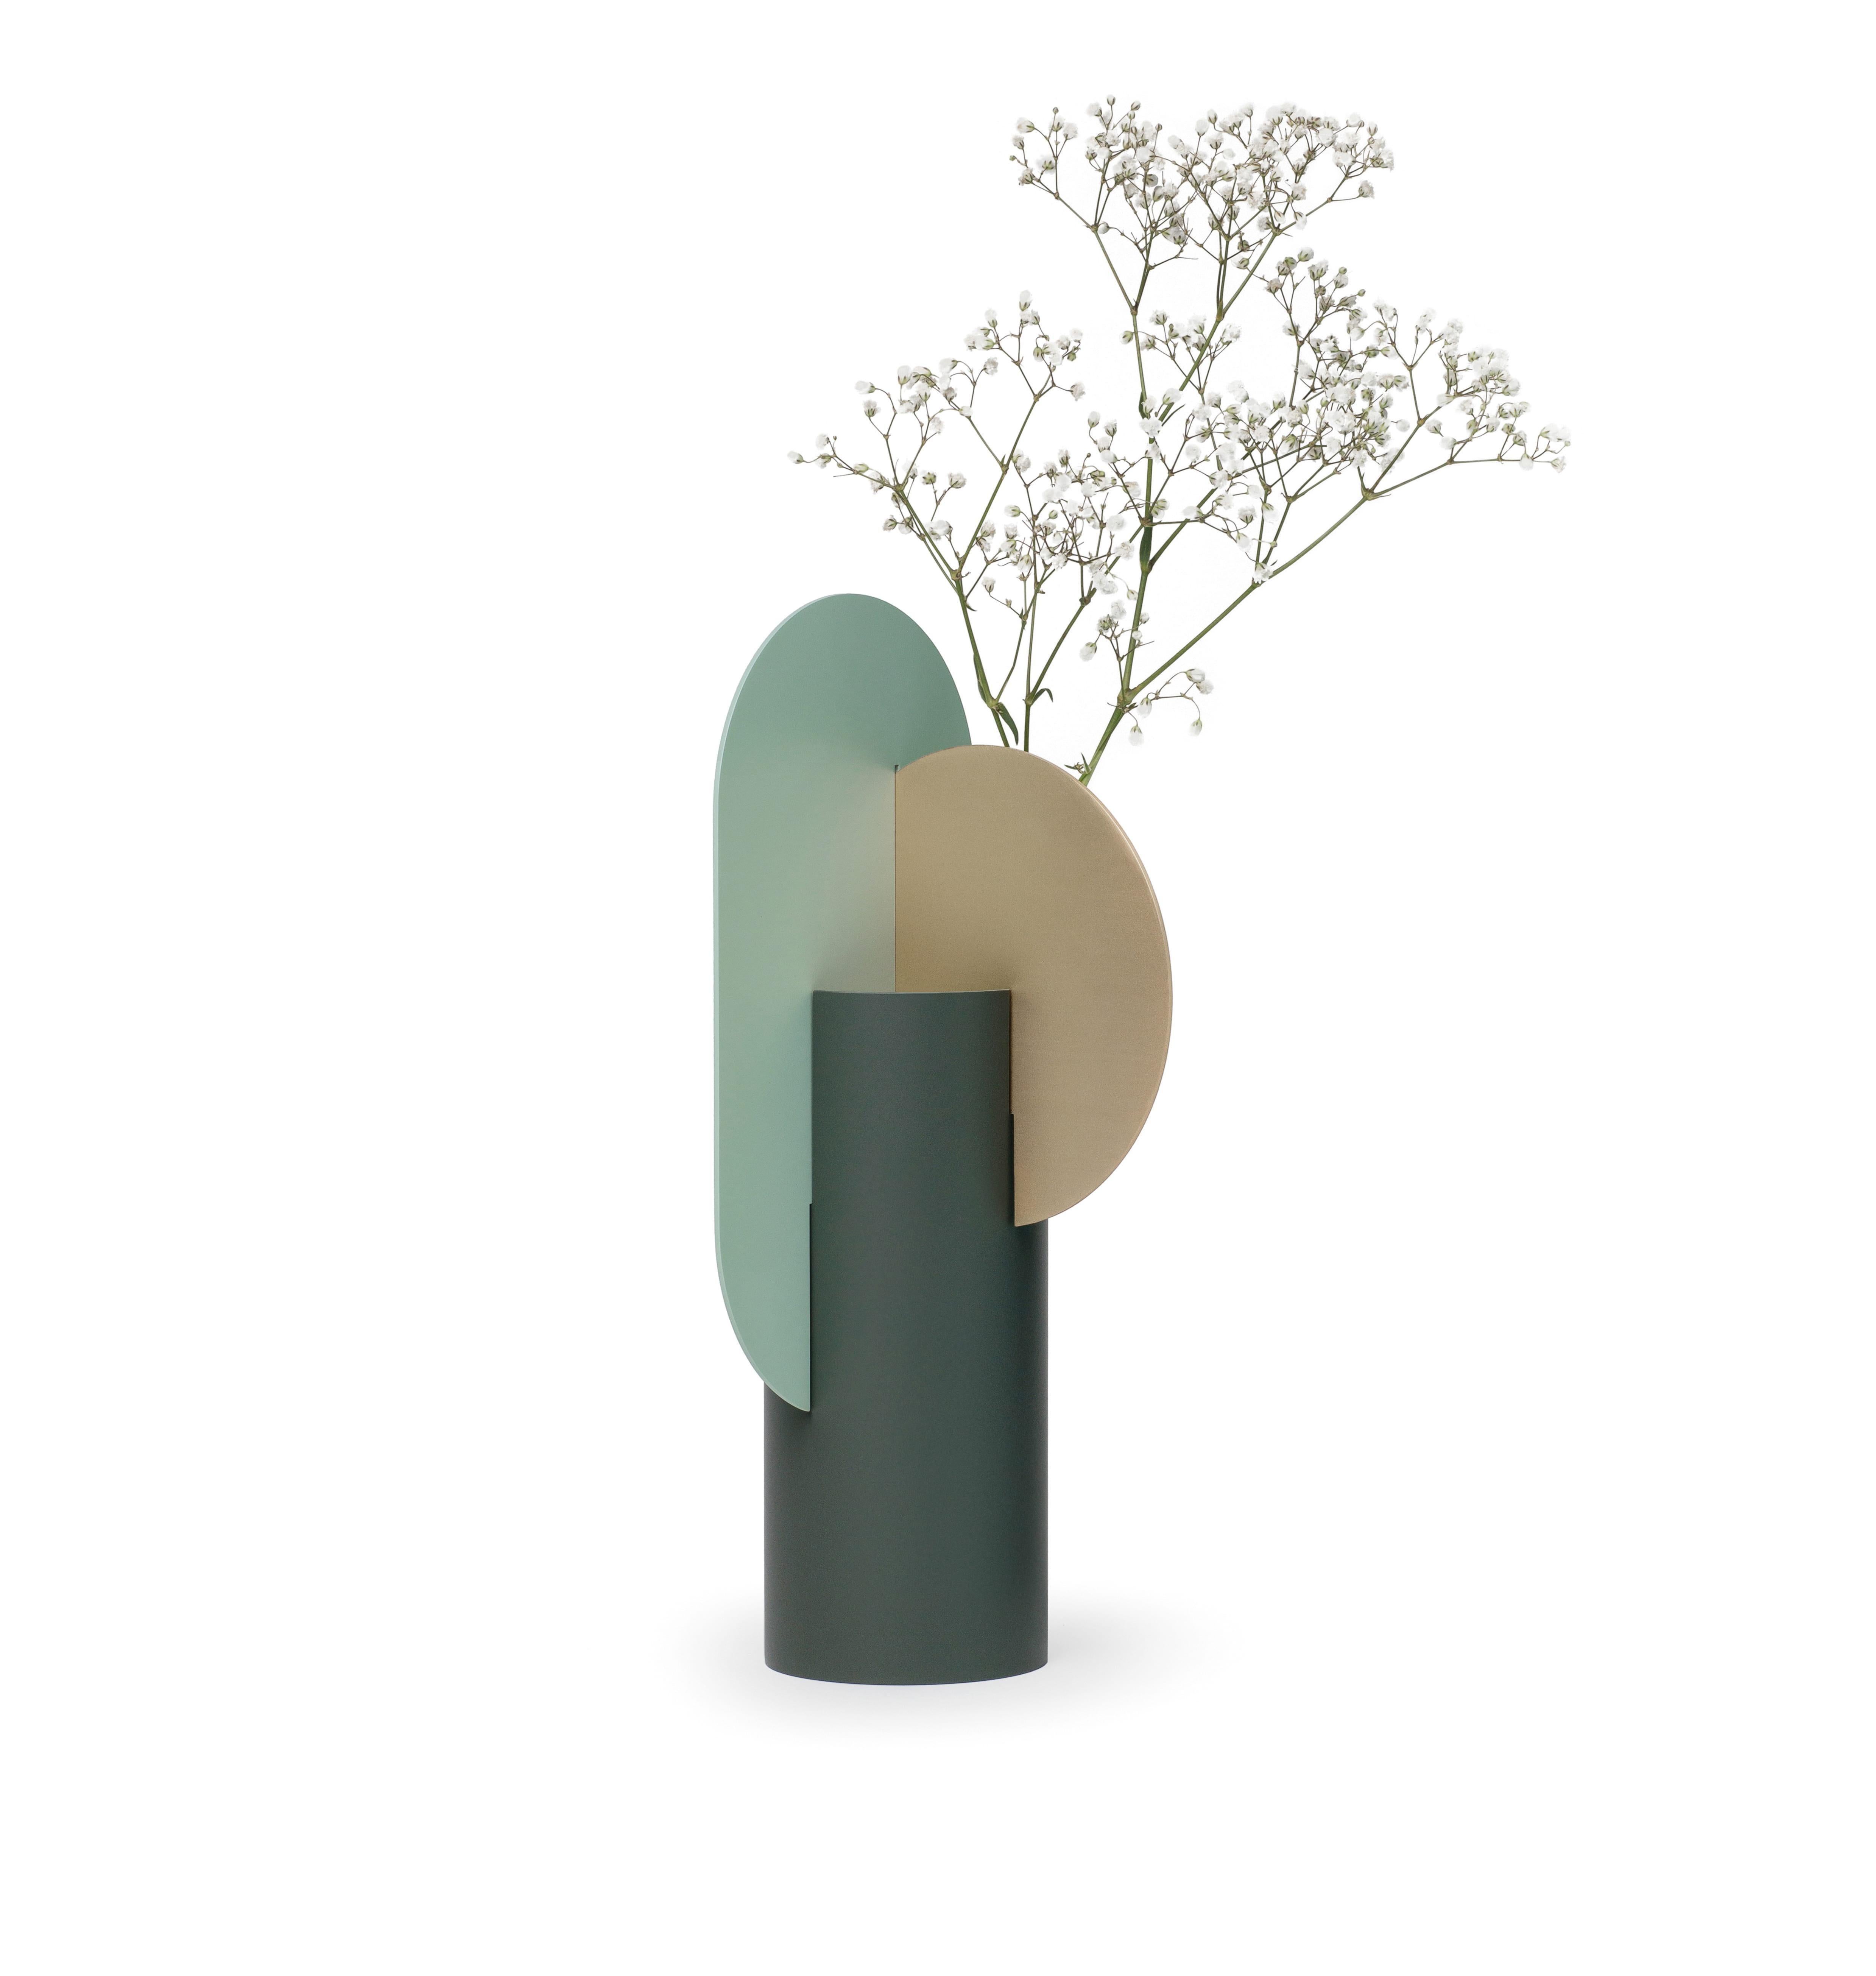 
Brand: Noom
Designer: Kateryna Sokolova
Materials: Brass, painted steel
Color scheme: CS2- pine green, sage green and brass
Dimensions: H 37 cm x W 17.5 cm x D 15 cm
Net Weight: 2.4 kg.

Yermilov vase, one of the vases from the 